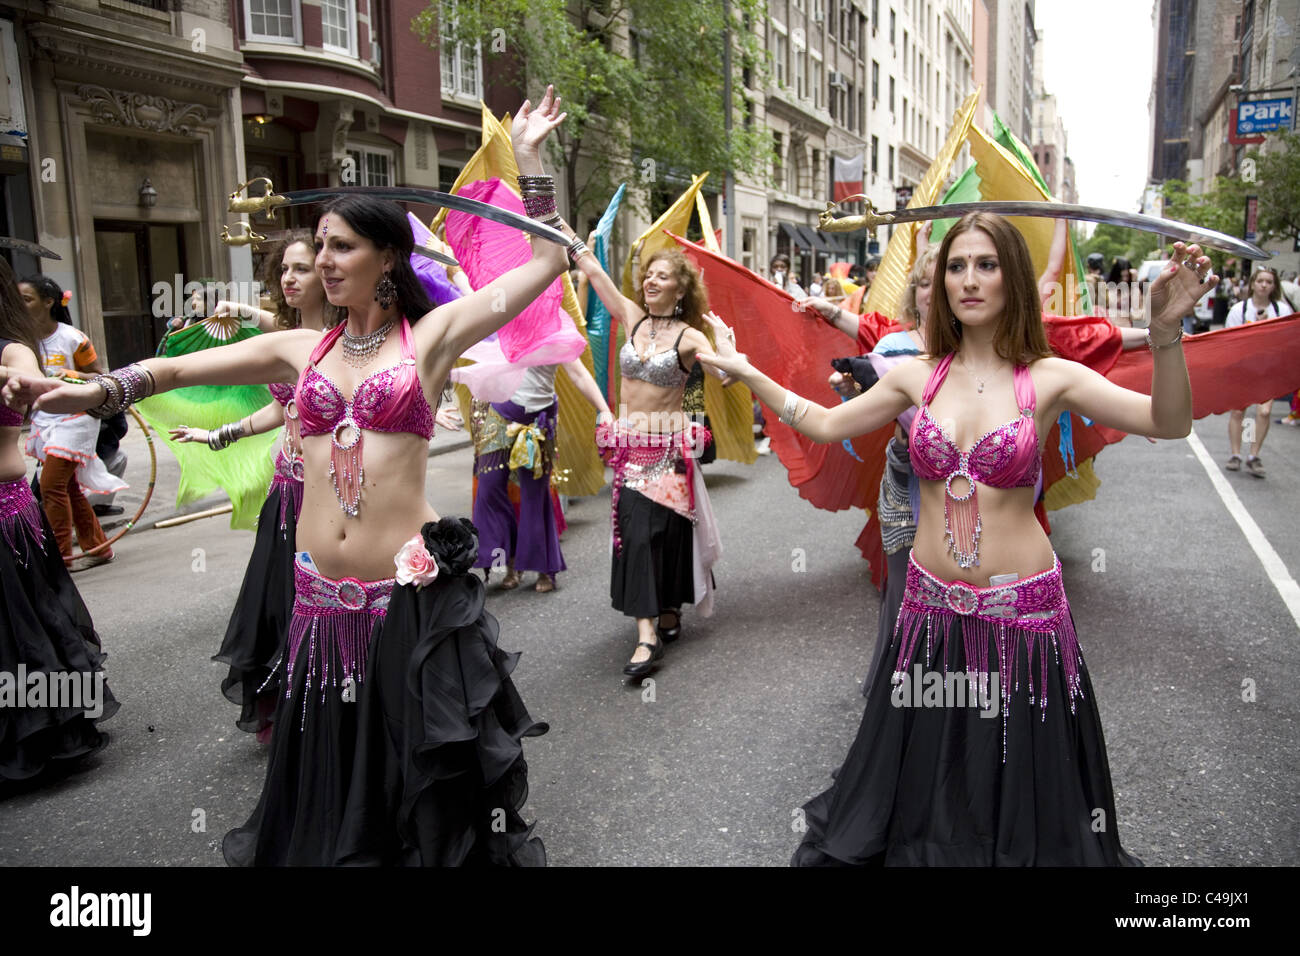 Anuual New York City Dance Parade along Broadway in New York City. Belly dancers balance swords on their heads as they dance. Stock Photo